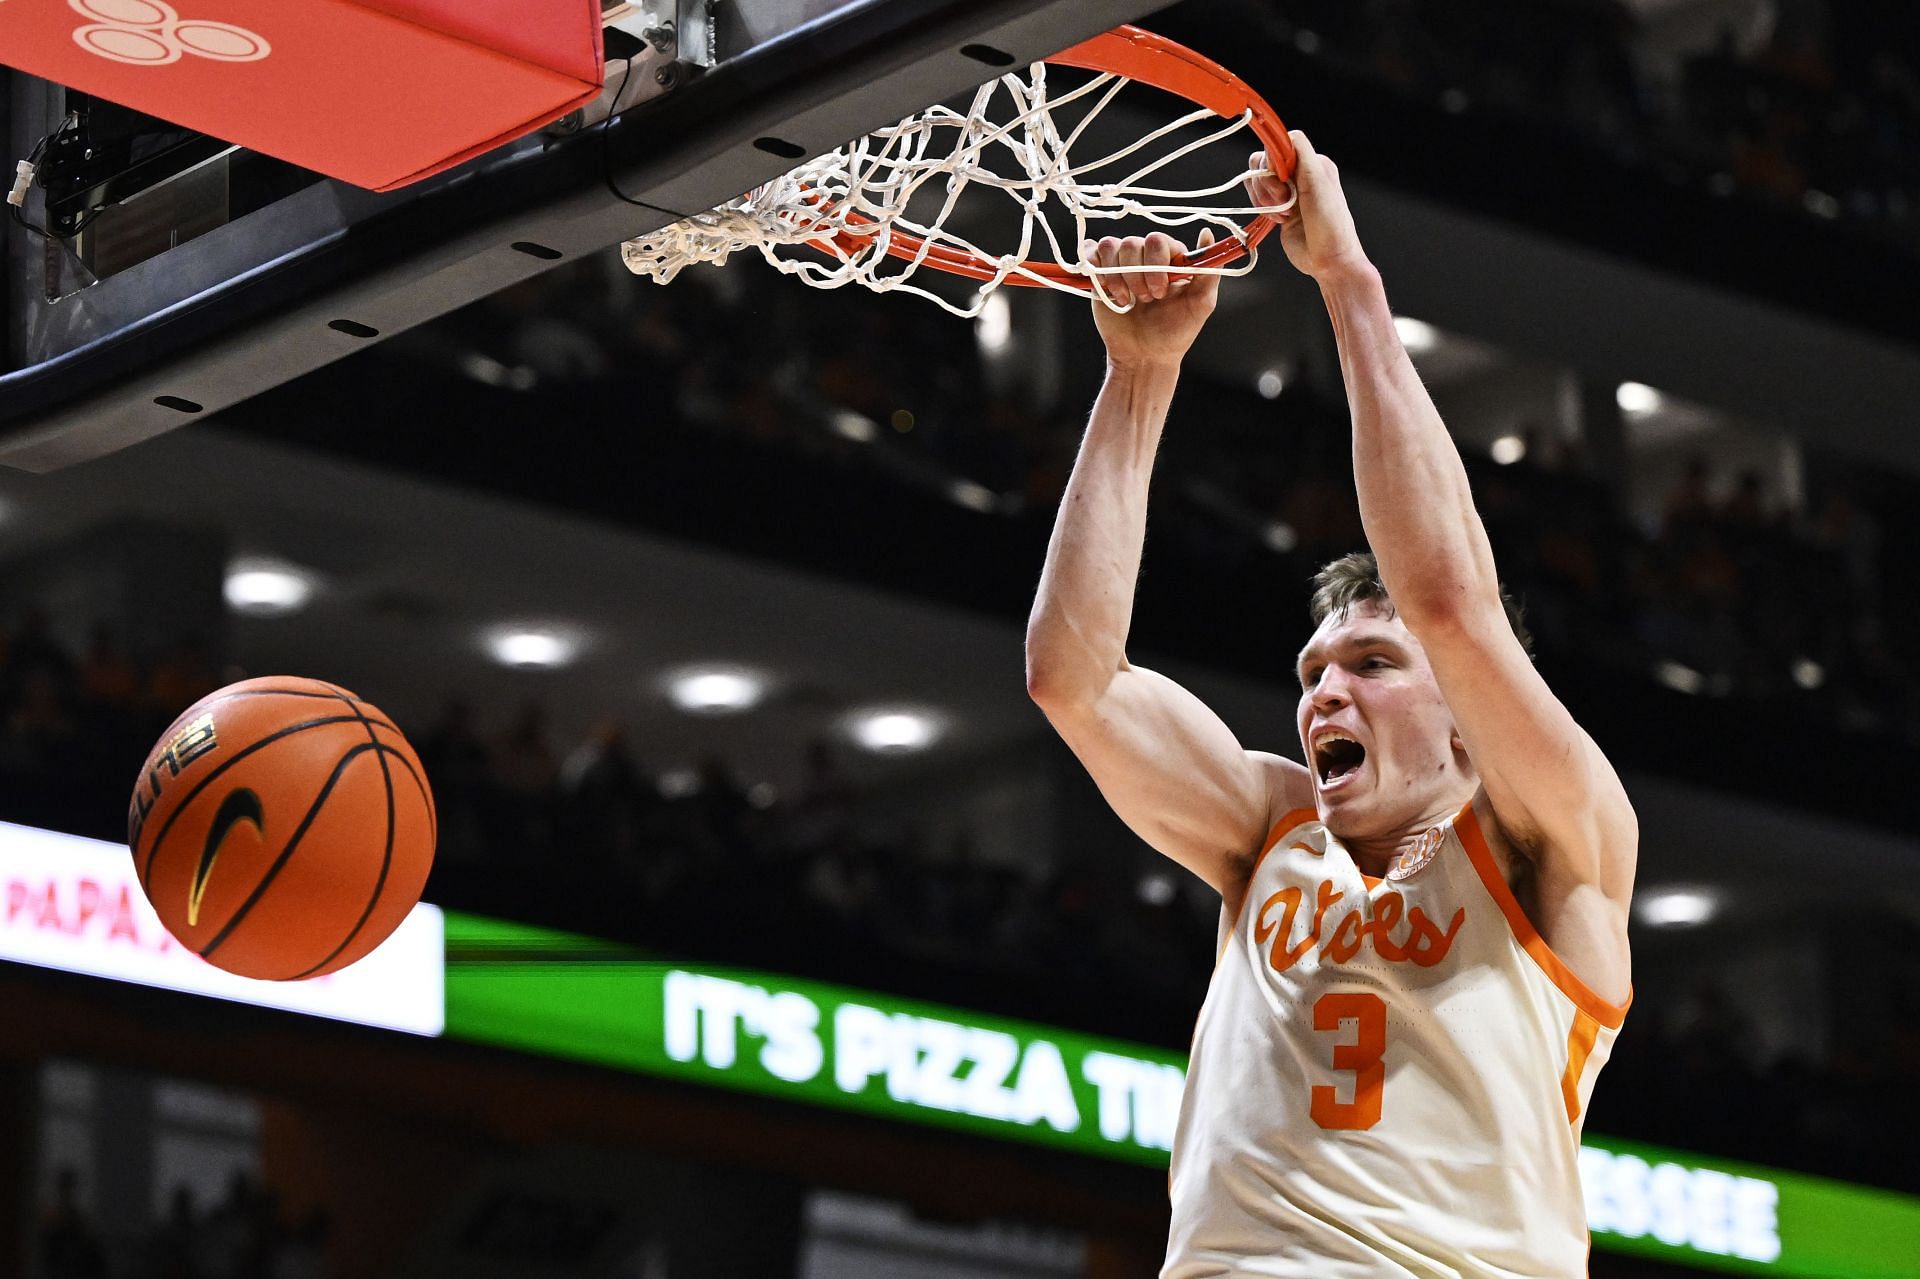 Dalton Knecht of the Tennessee Volunteers dunks